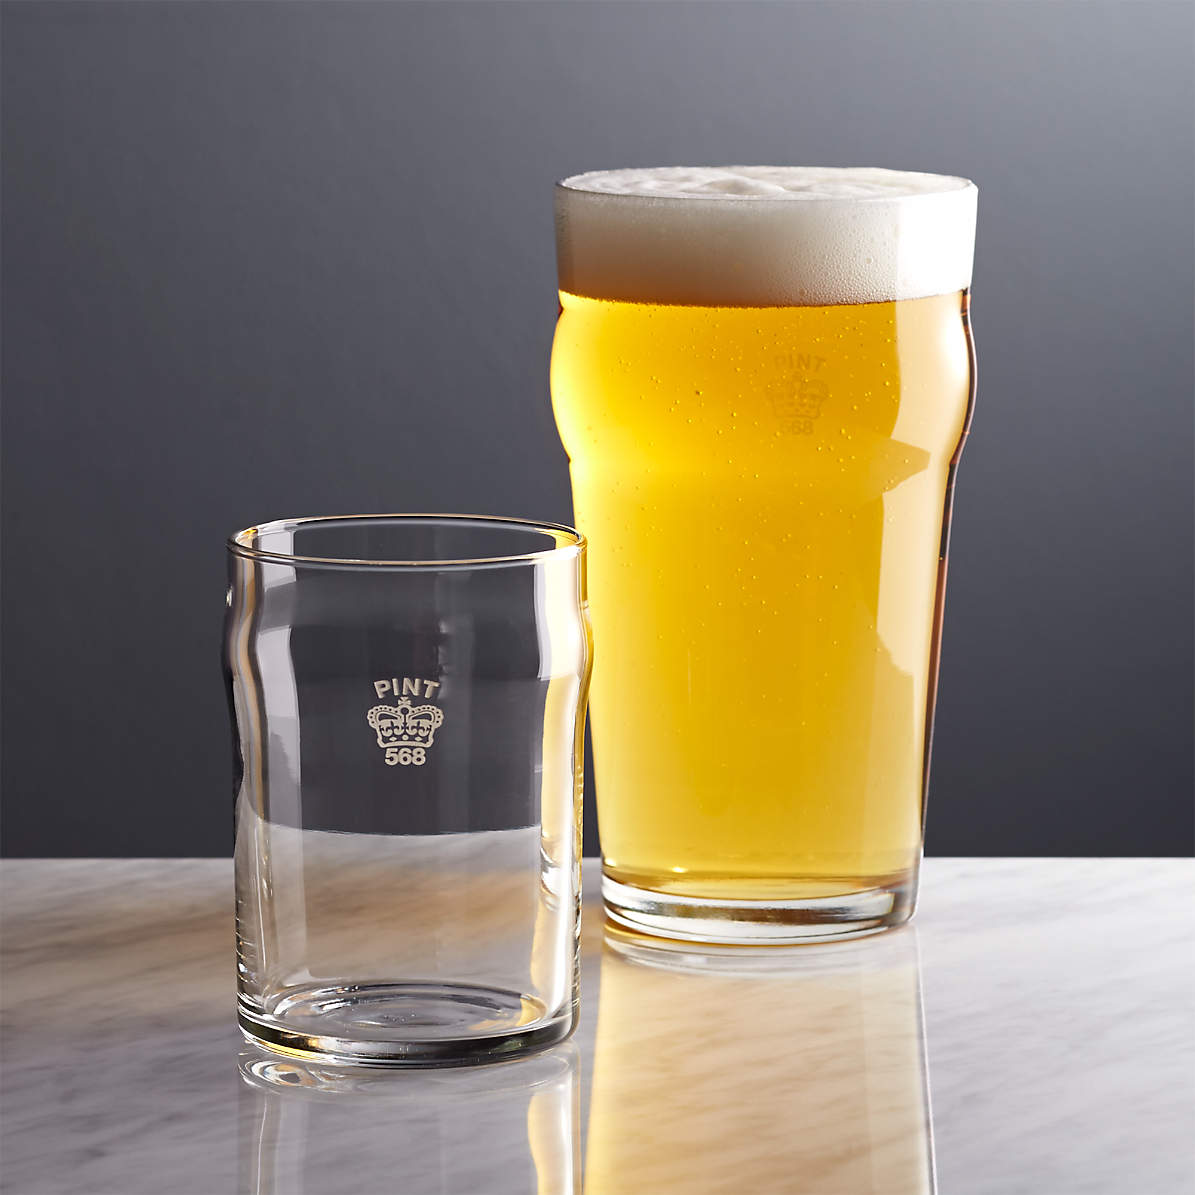 pint-and-half-pint-glasses-with-crown.jp